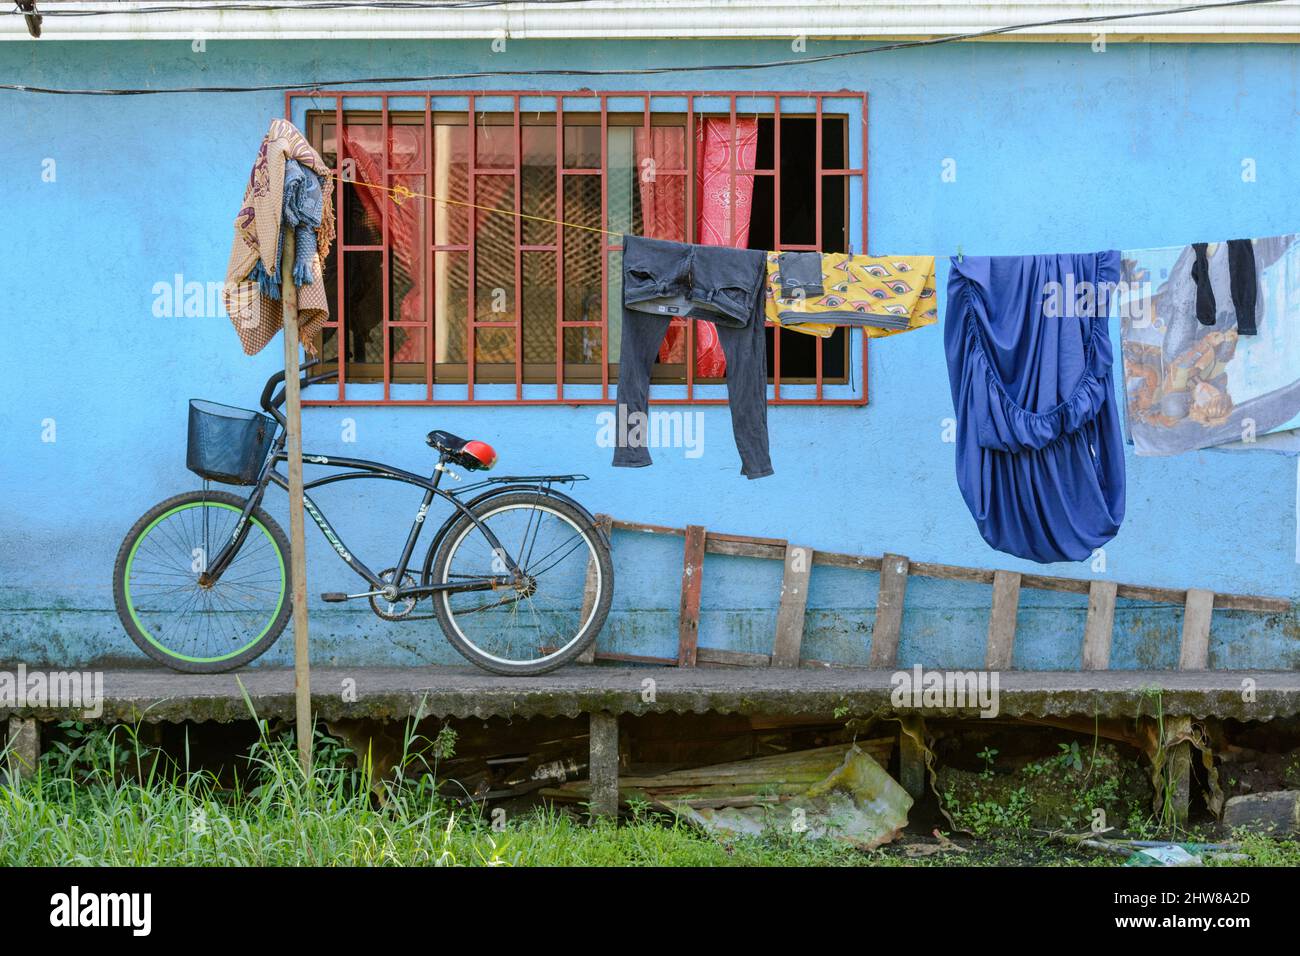 Washing hanging outside a house in the village of Tortuguero, Limon Province, Costa Rica, Central America Stock Photo